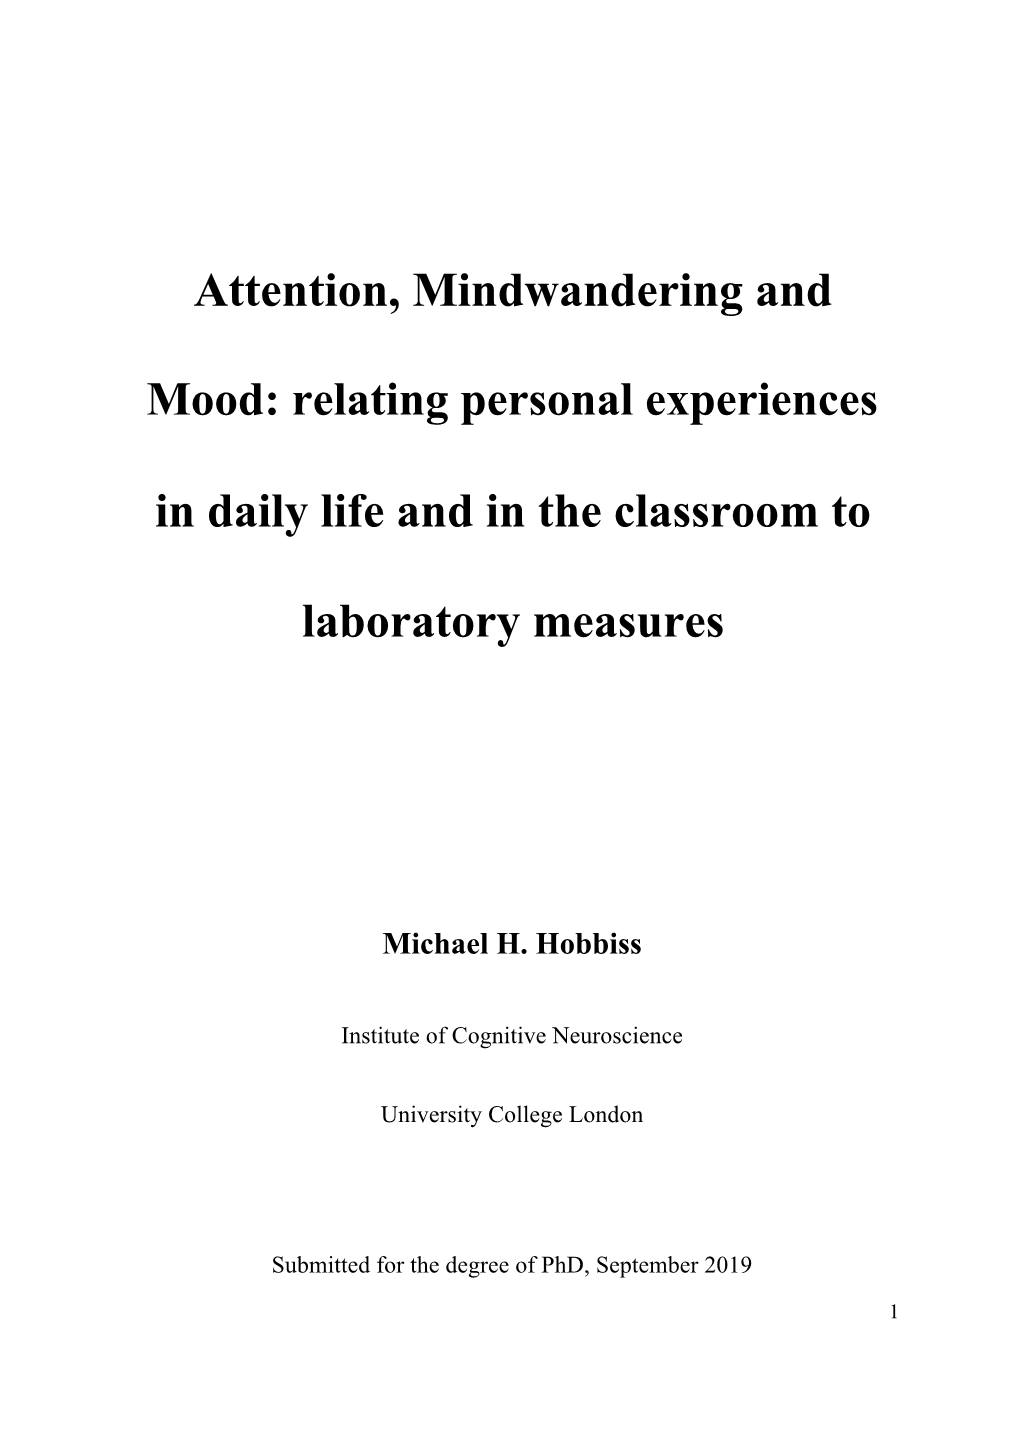 Attention, Mindwandering and in Daily Life and in the Classroom To